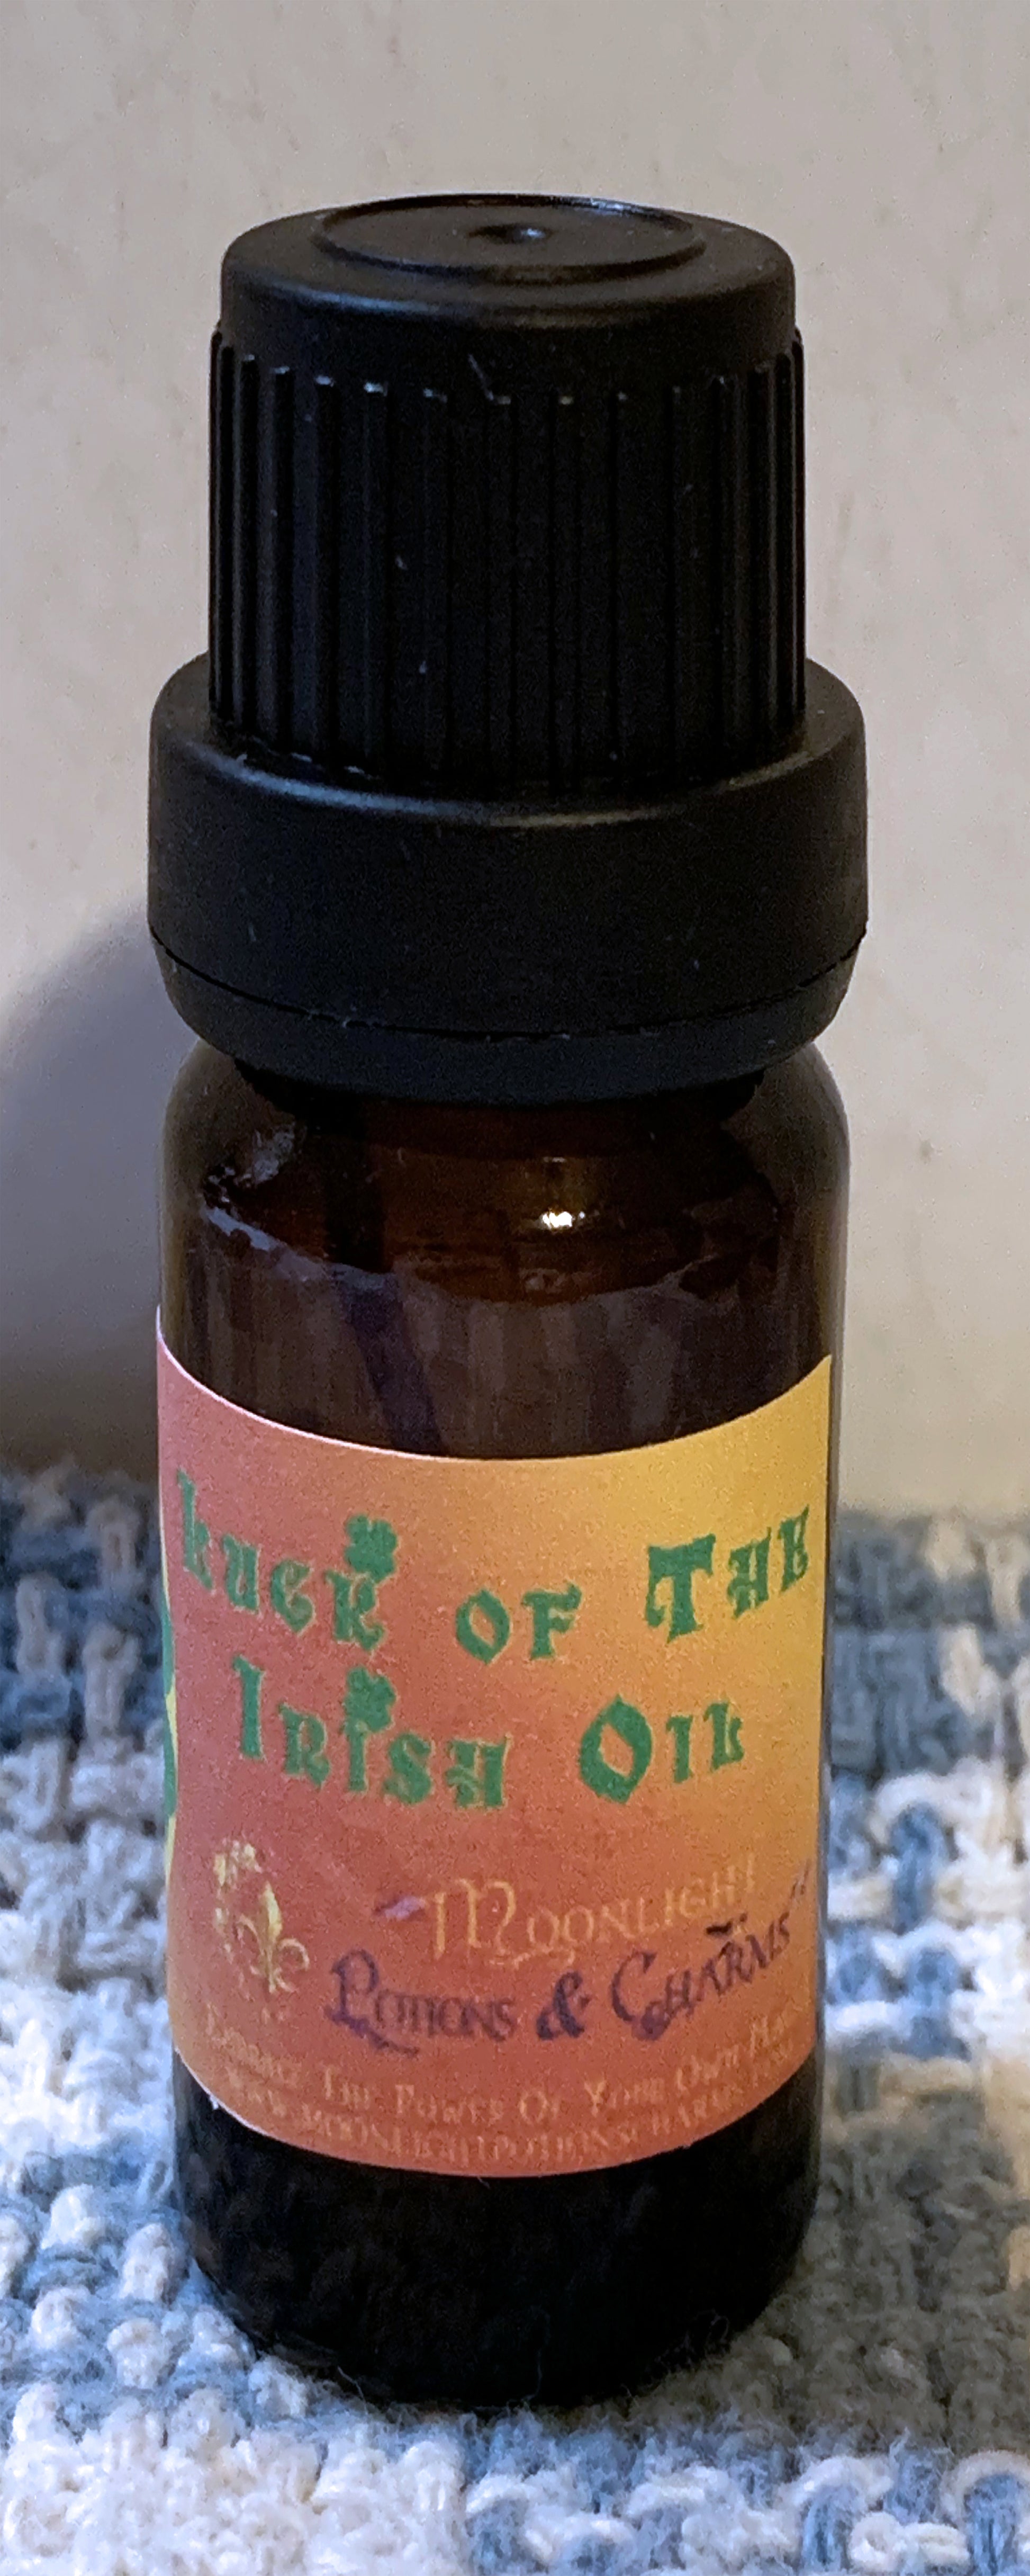 Luck of the Irish Oil - Moonlight Potions & Charms